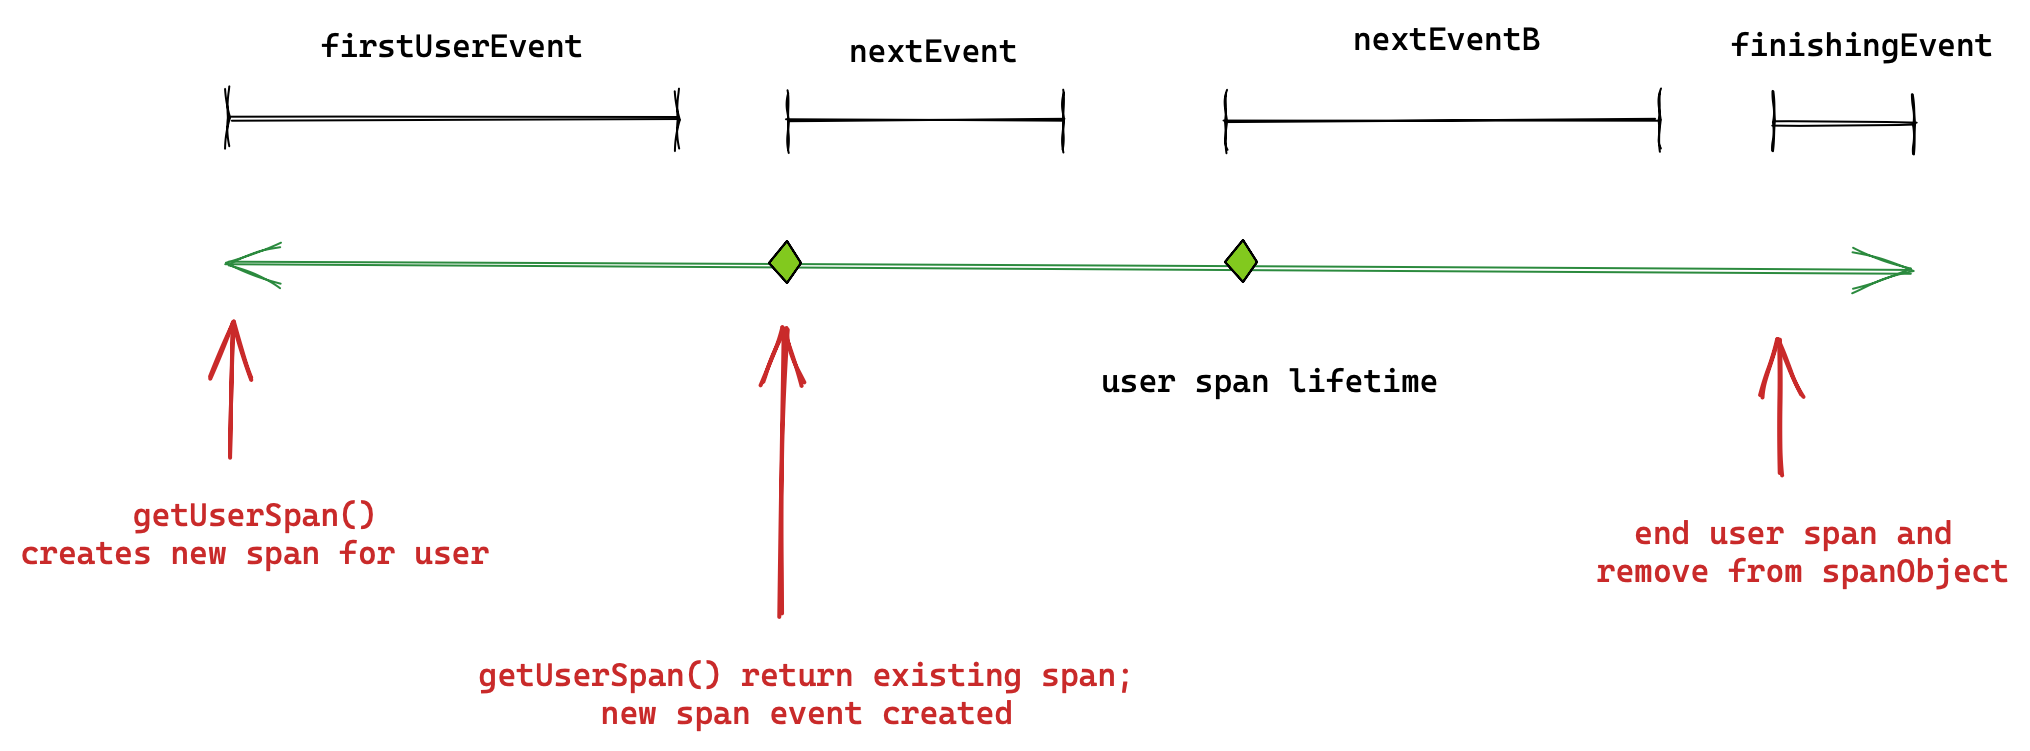 Summary of spans and events created